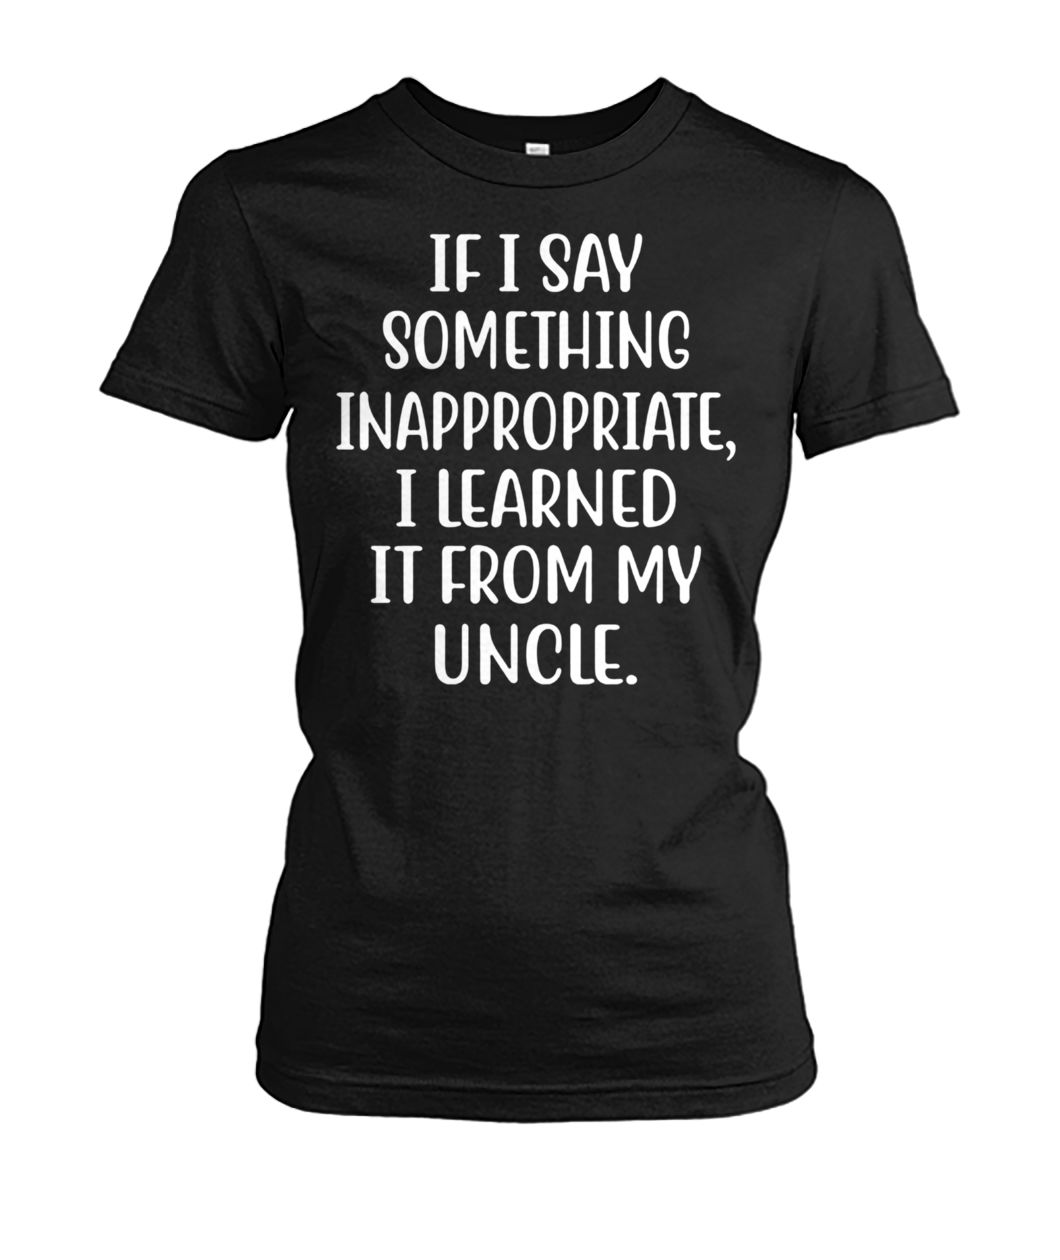 If I say something inappropriate I learned from uncle women's crew tee